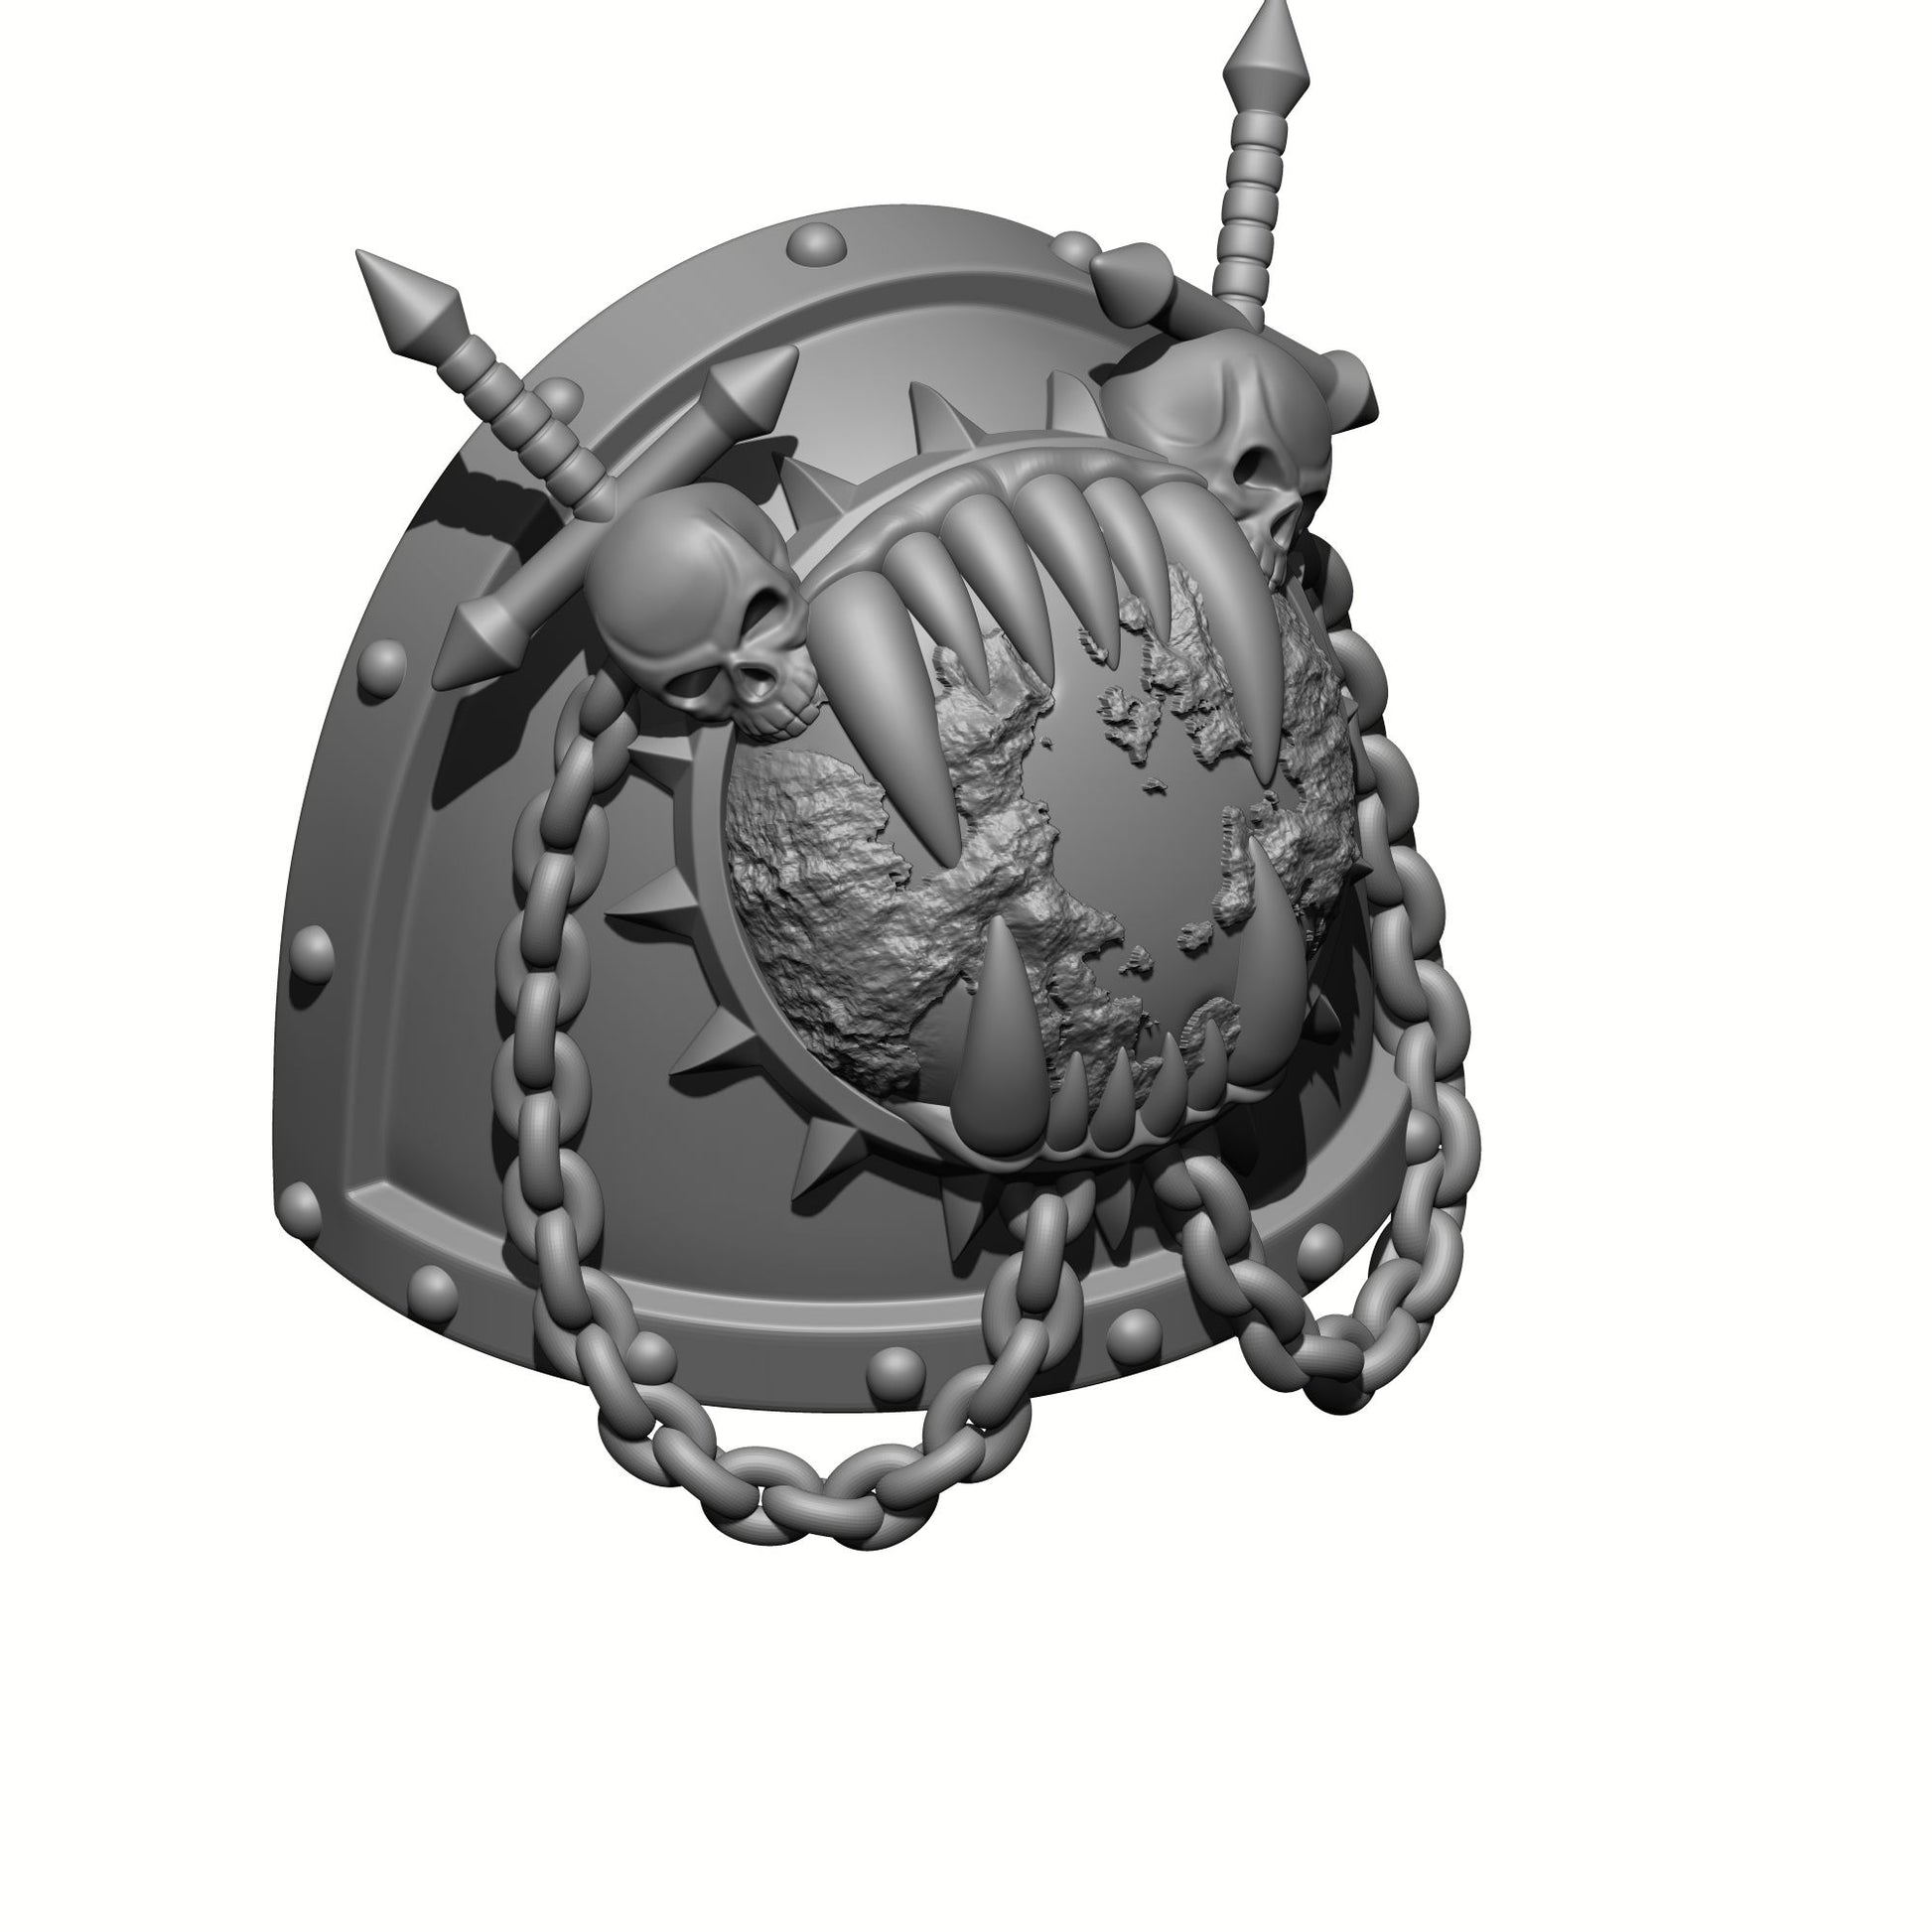  World Eaters Chapter MKVII Shoulder Pad Maw eating Planet Two Skulls Chains and Two Swords: Compatible with McFarlane Space Marine Action Figures Khorne Berserker